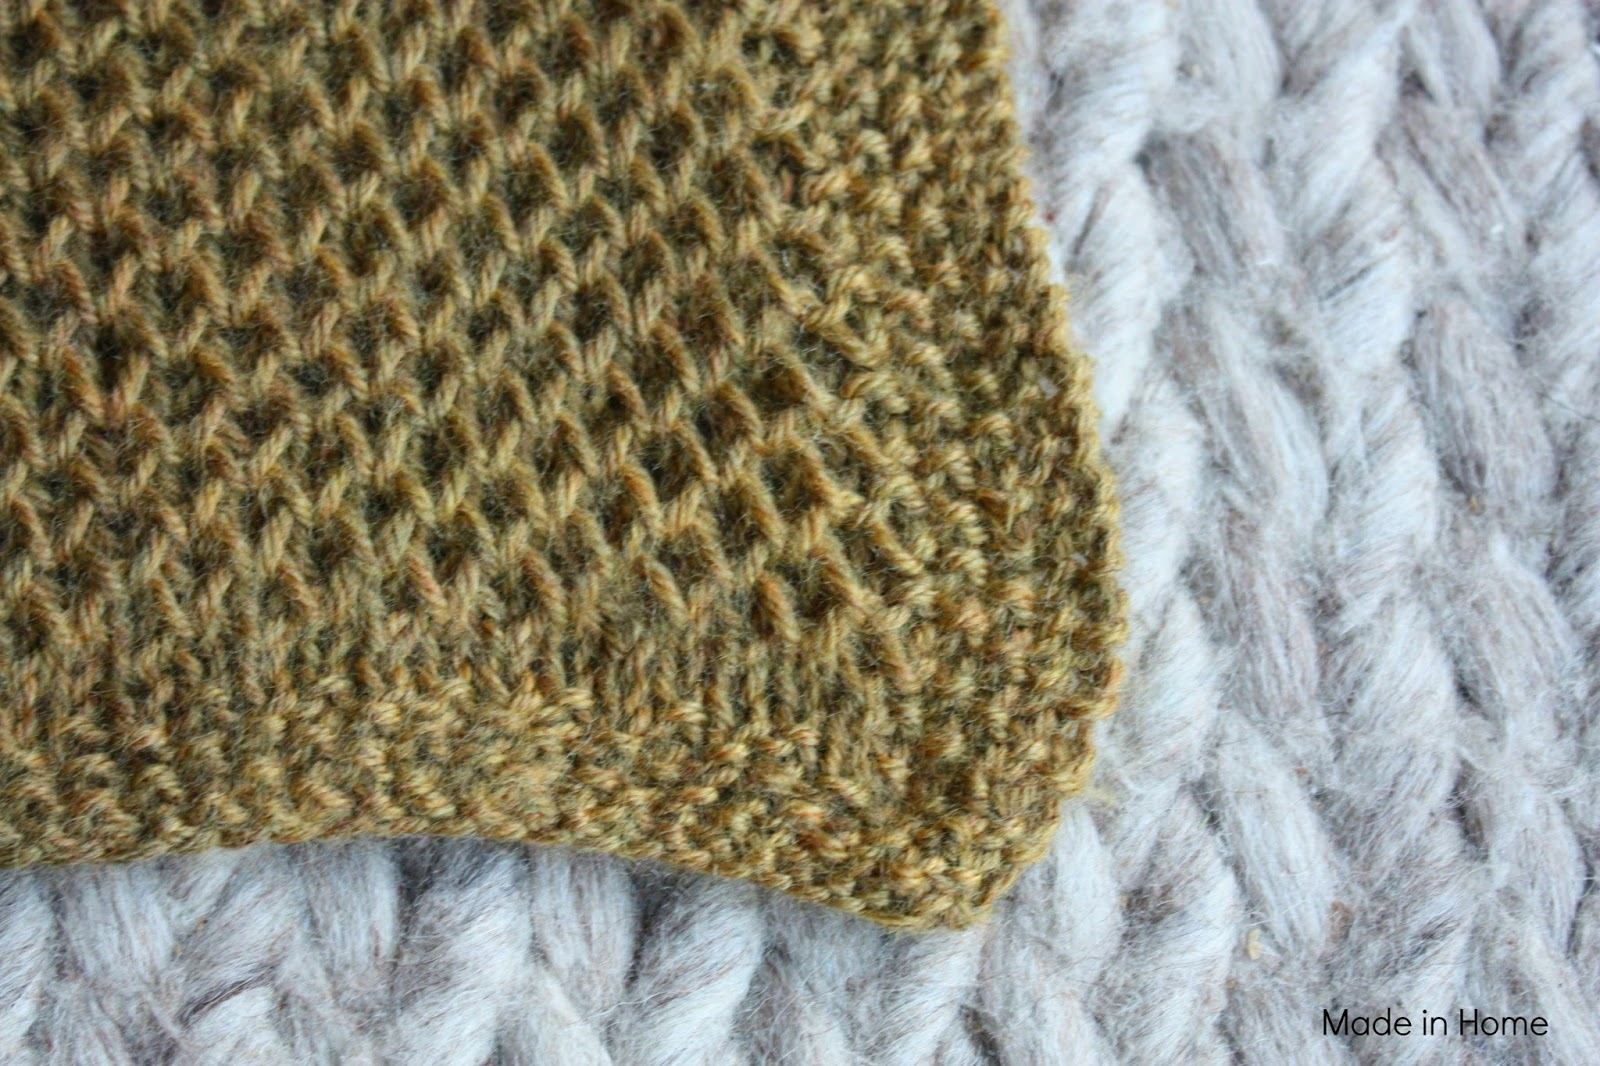 Honeycomb Knitting Stitch Pattern Made In Home Study Of Honeycomb Knitting